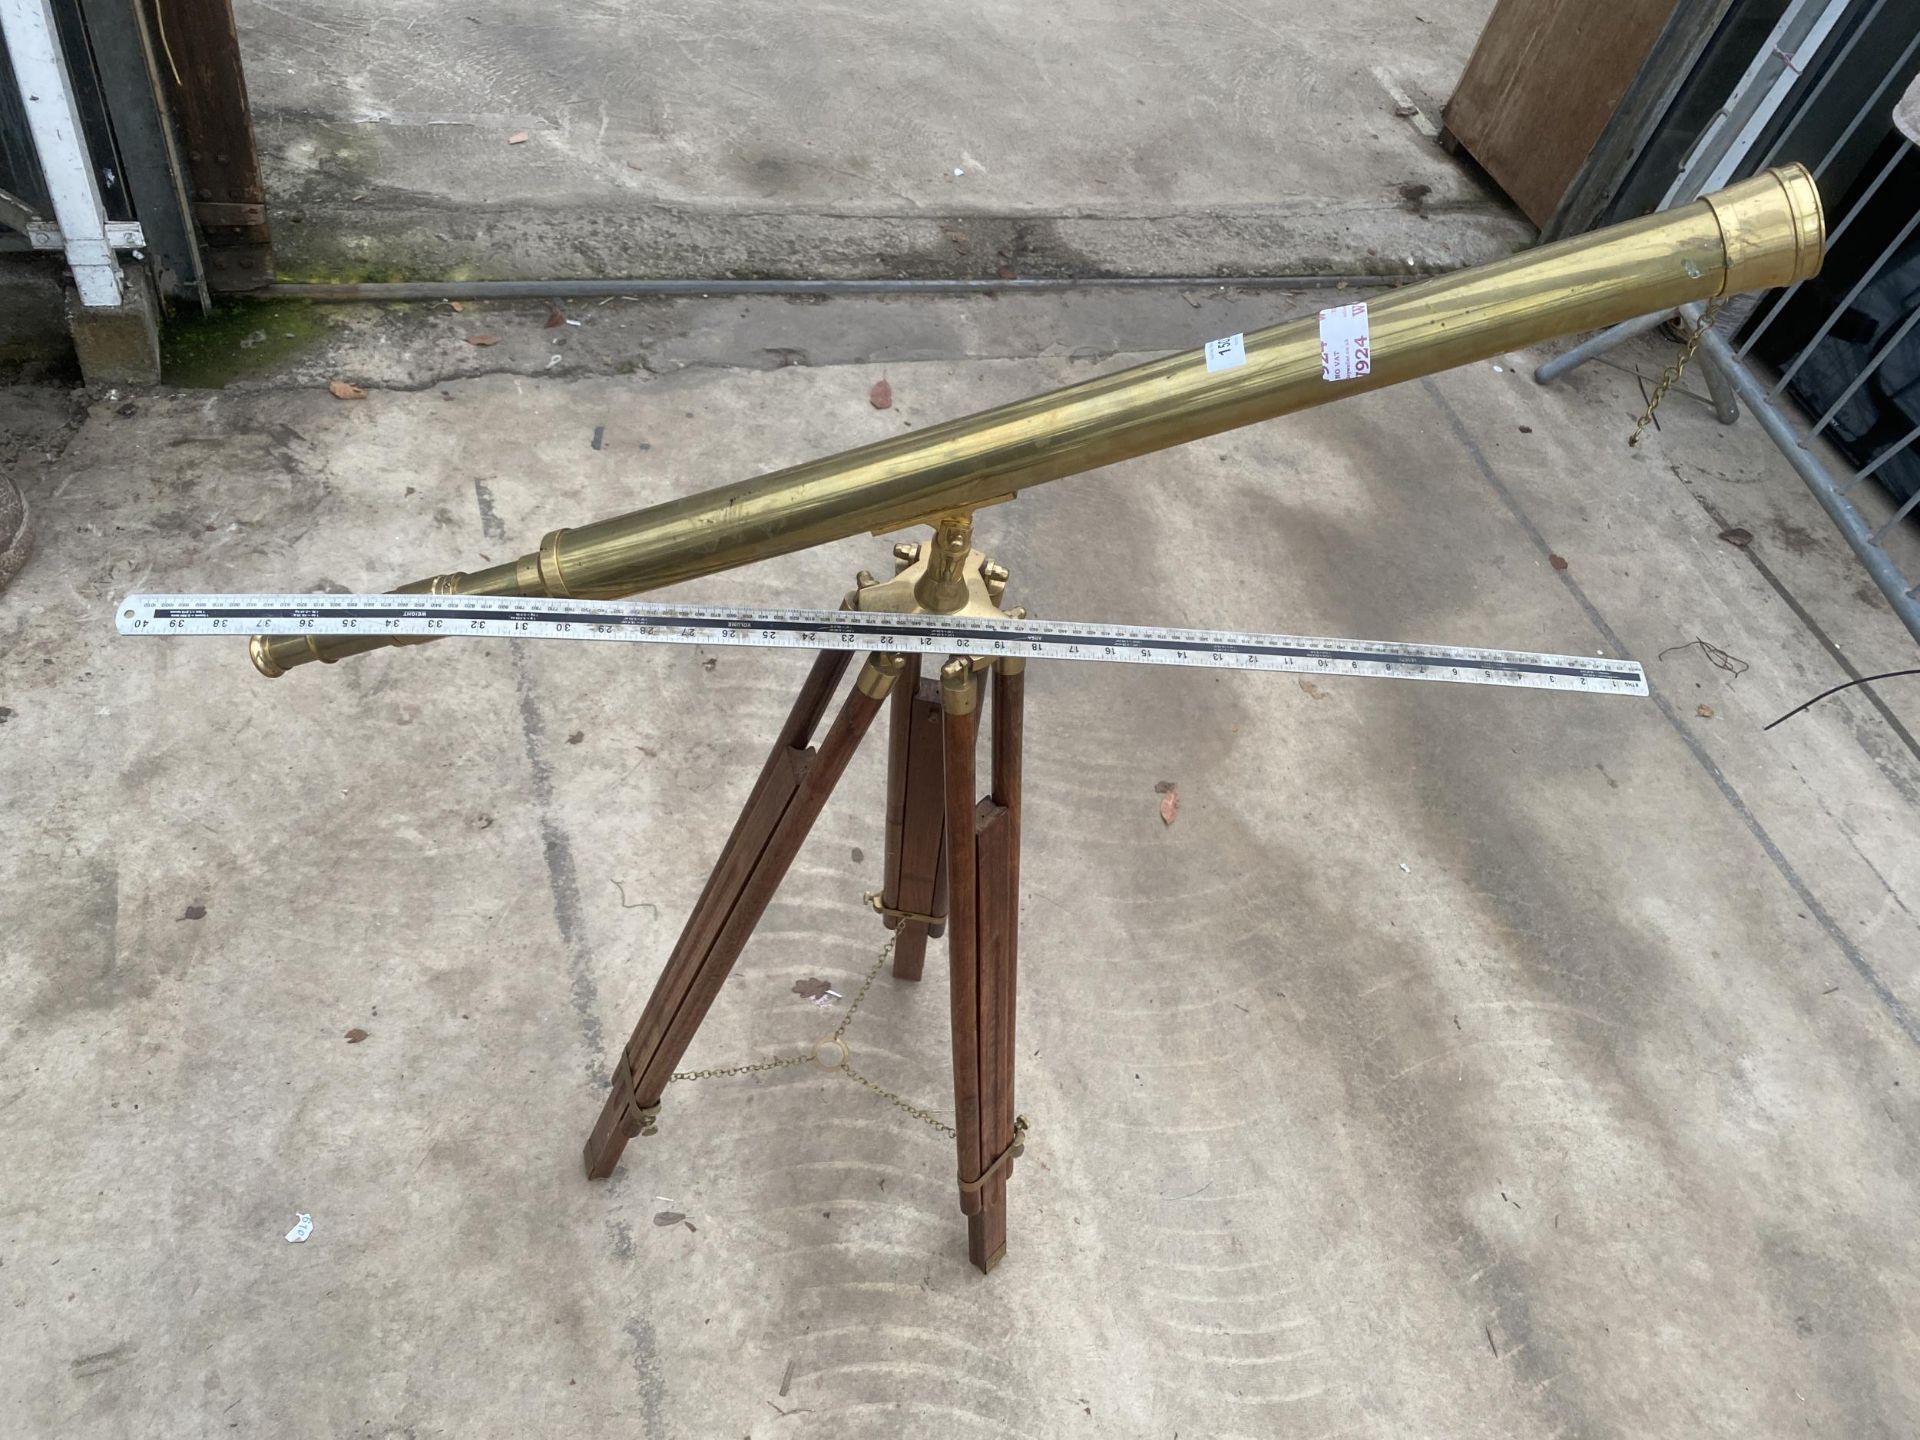 A VINTAGE BRASS TELESCOPE WITH WOODEN TRIPOD STAND - Image 4 of 5